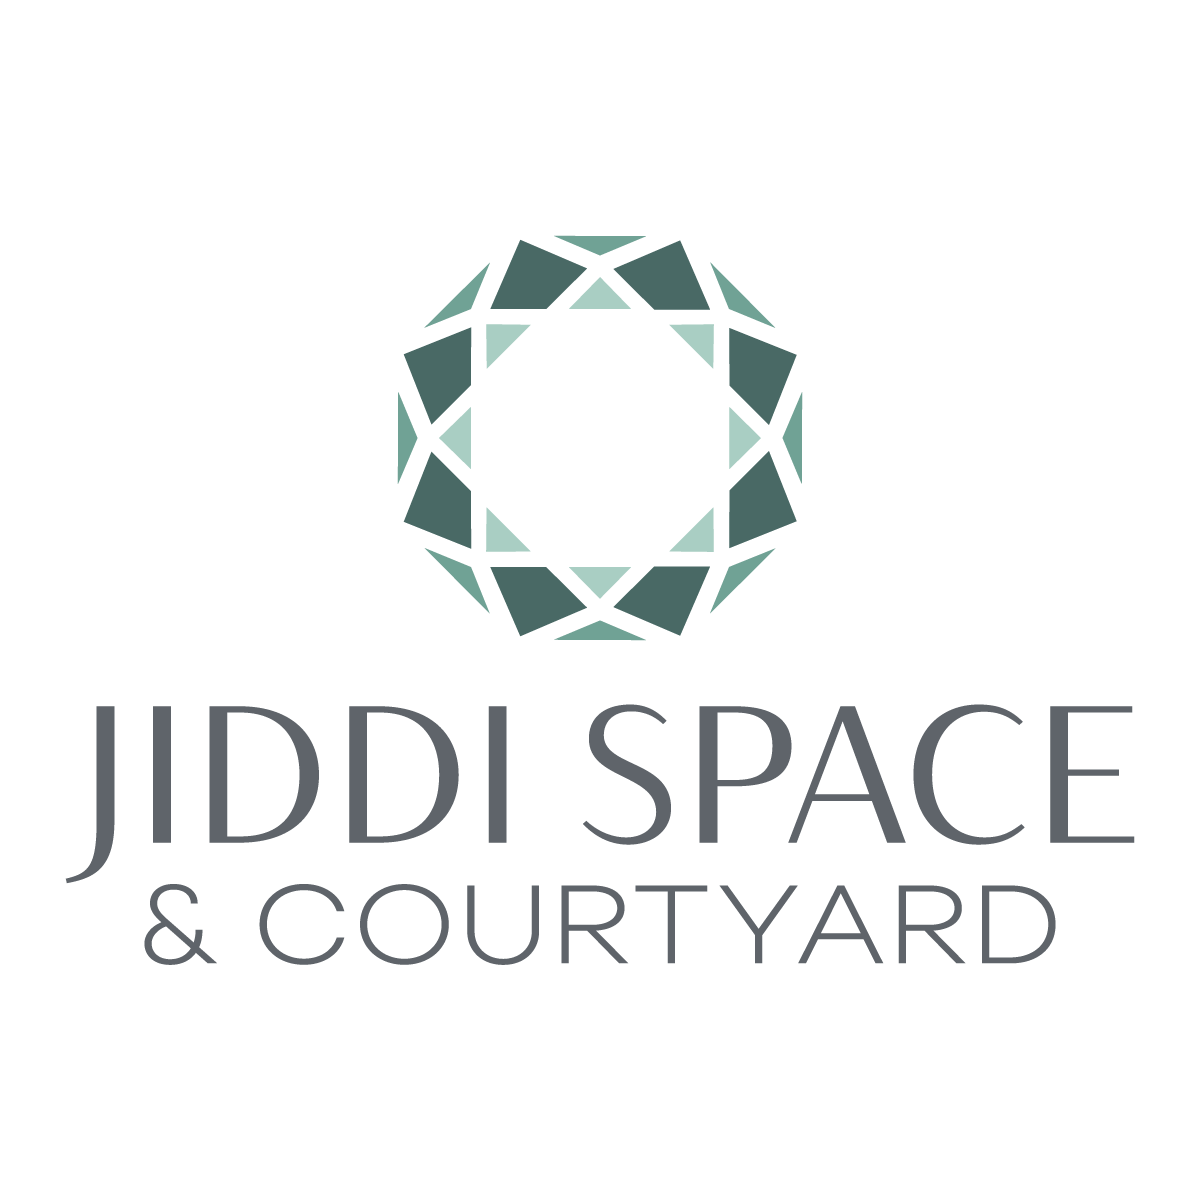 Jiddi Space & Courtyard logo design by logo designer Amy Lyons for your inspiration and for the worlds largest logo competition